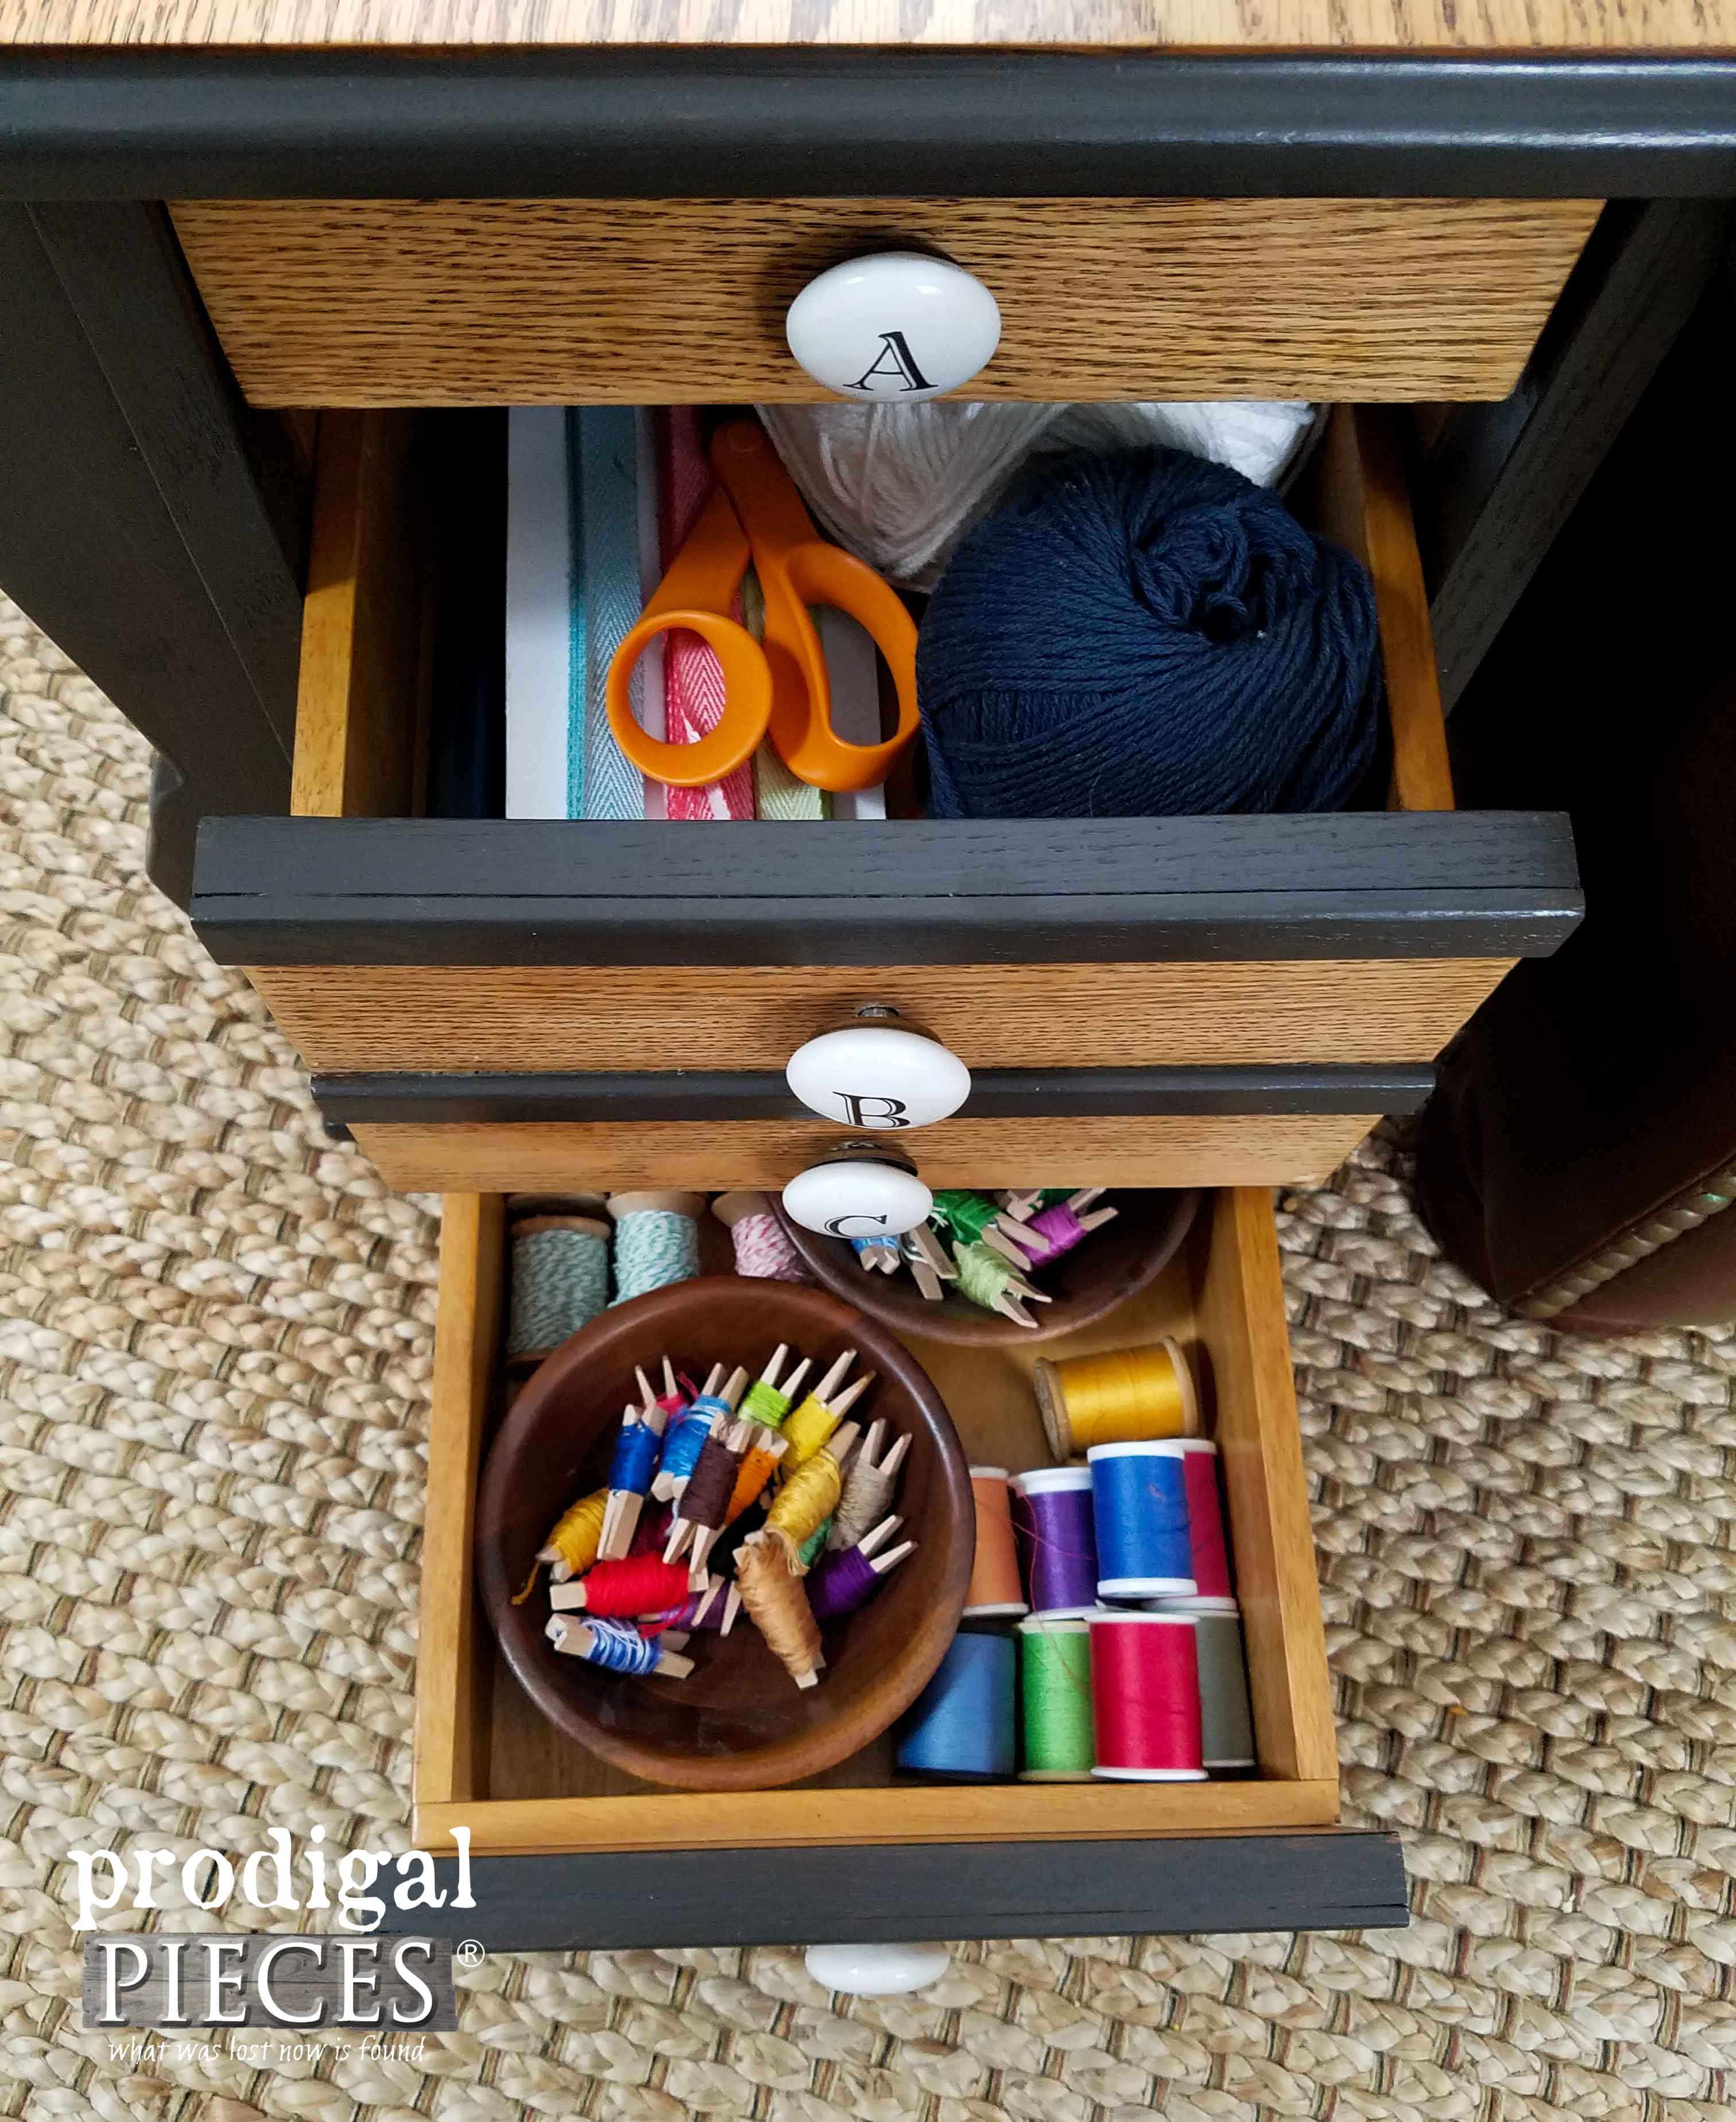 Inside Sewing Table Filled with Notions by Prodigal Pieces | prodigalpieces.com